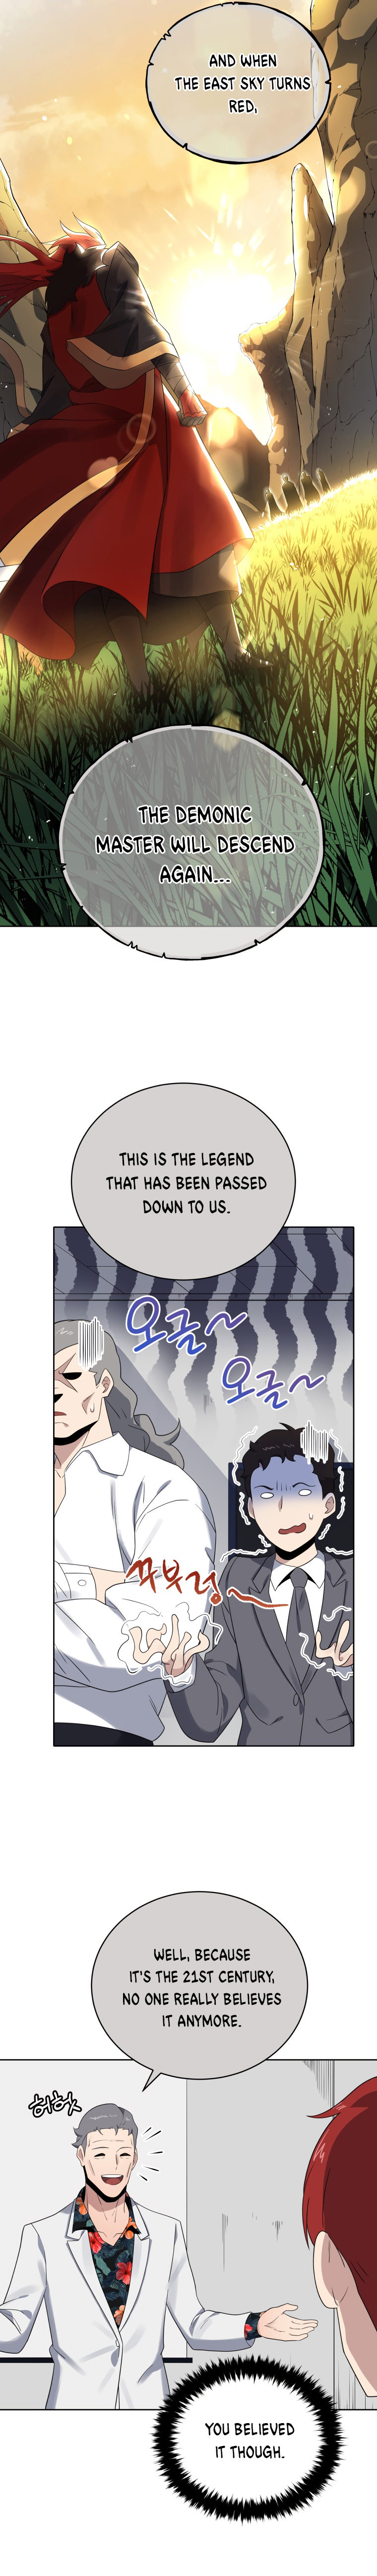 The Descent of the Demonic Master - Chapter 133 Page 4